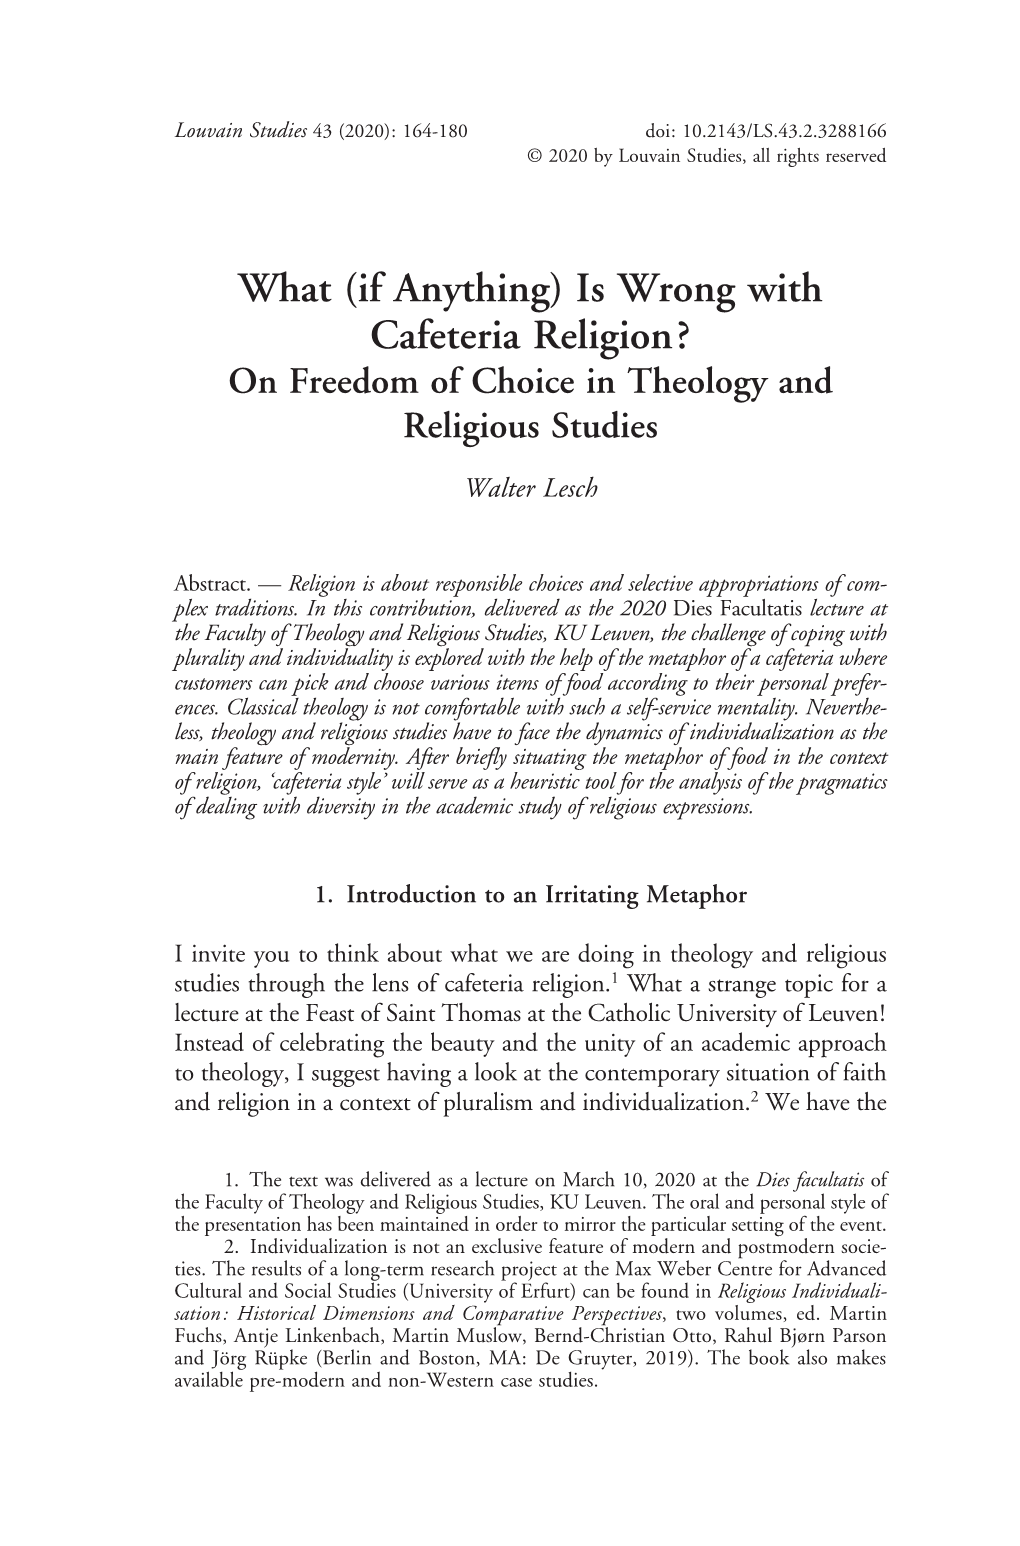 Is Wrong with Cafeteria Religion? on Freedom of Choice in Theology and Religious Studies Walter Lesch